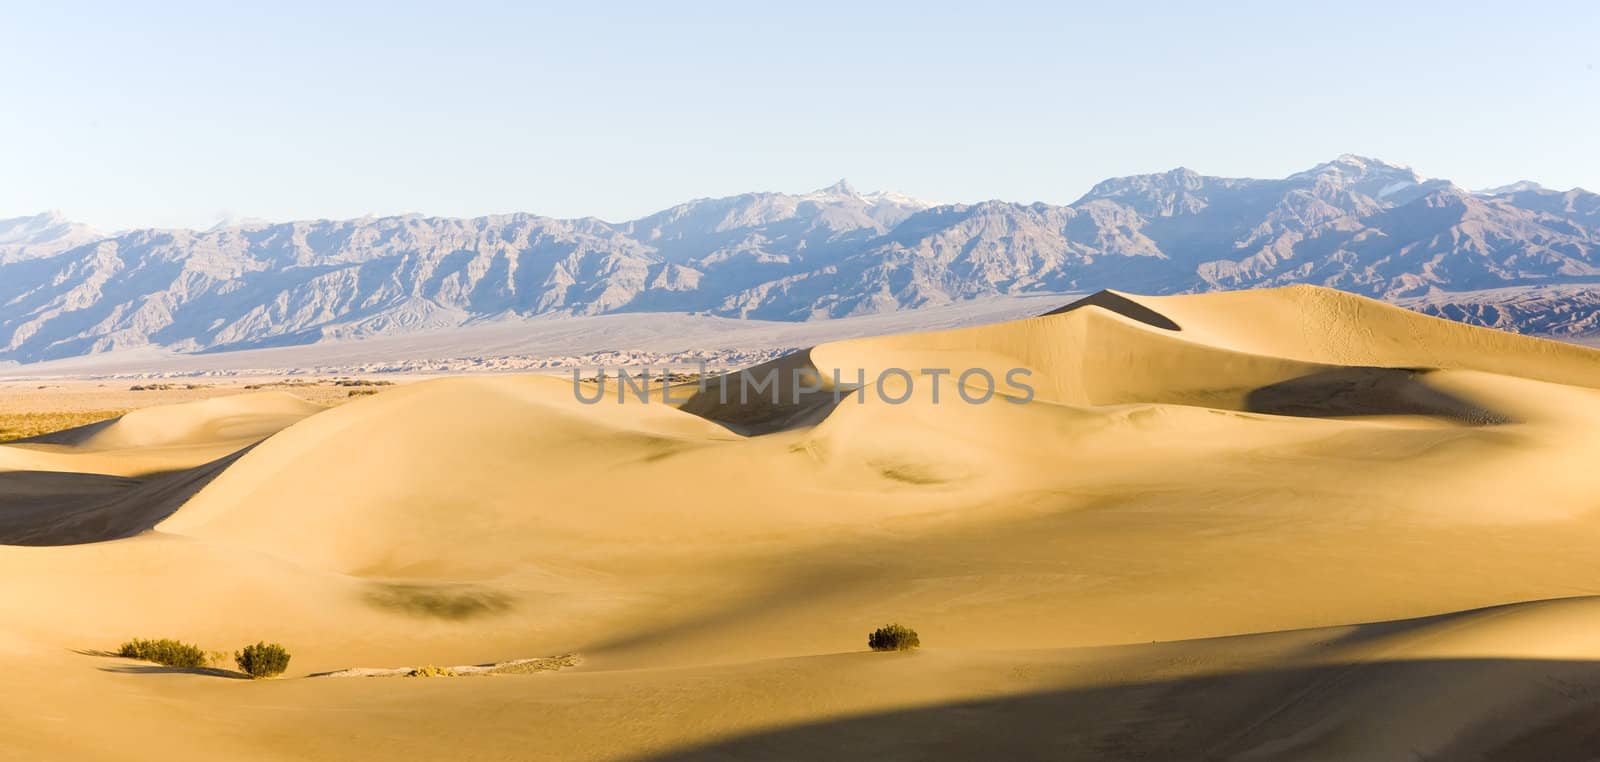 Stovepipe Wells sand dunes, Death Valley National Park, Californ by phbcz